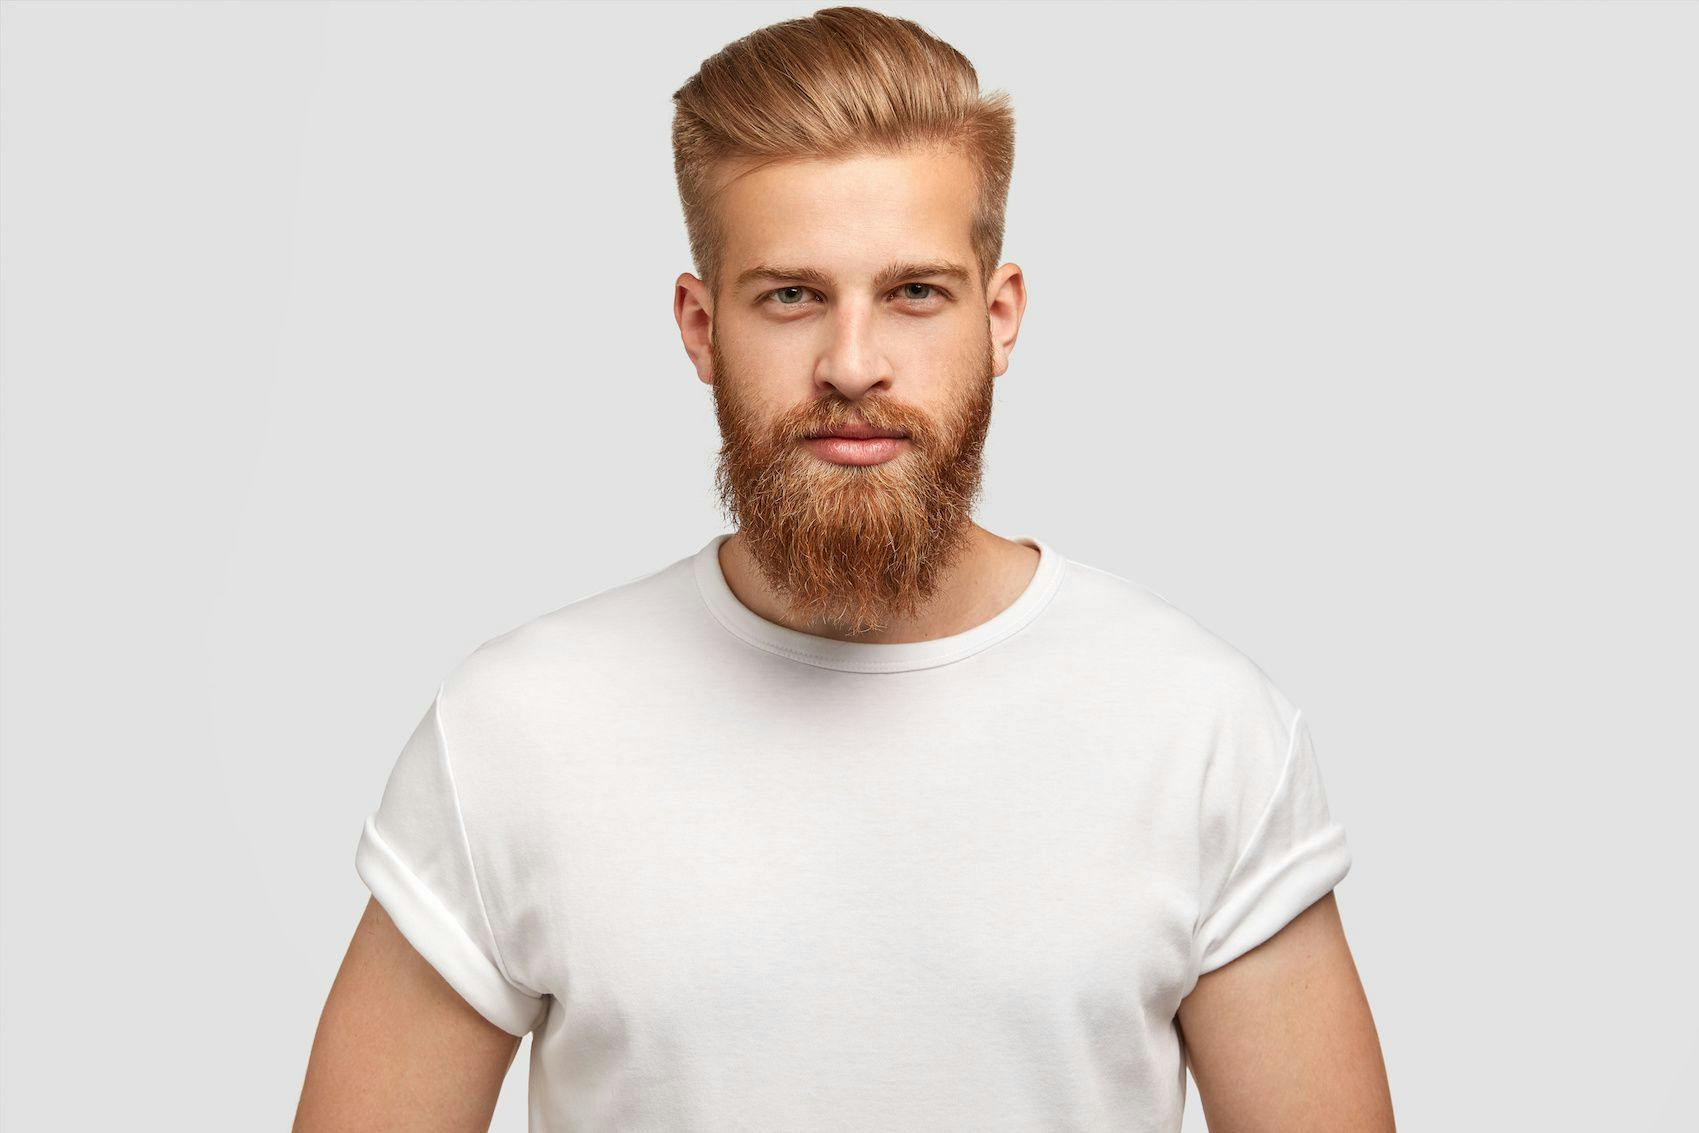 Man with thick hair and beard